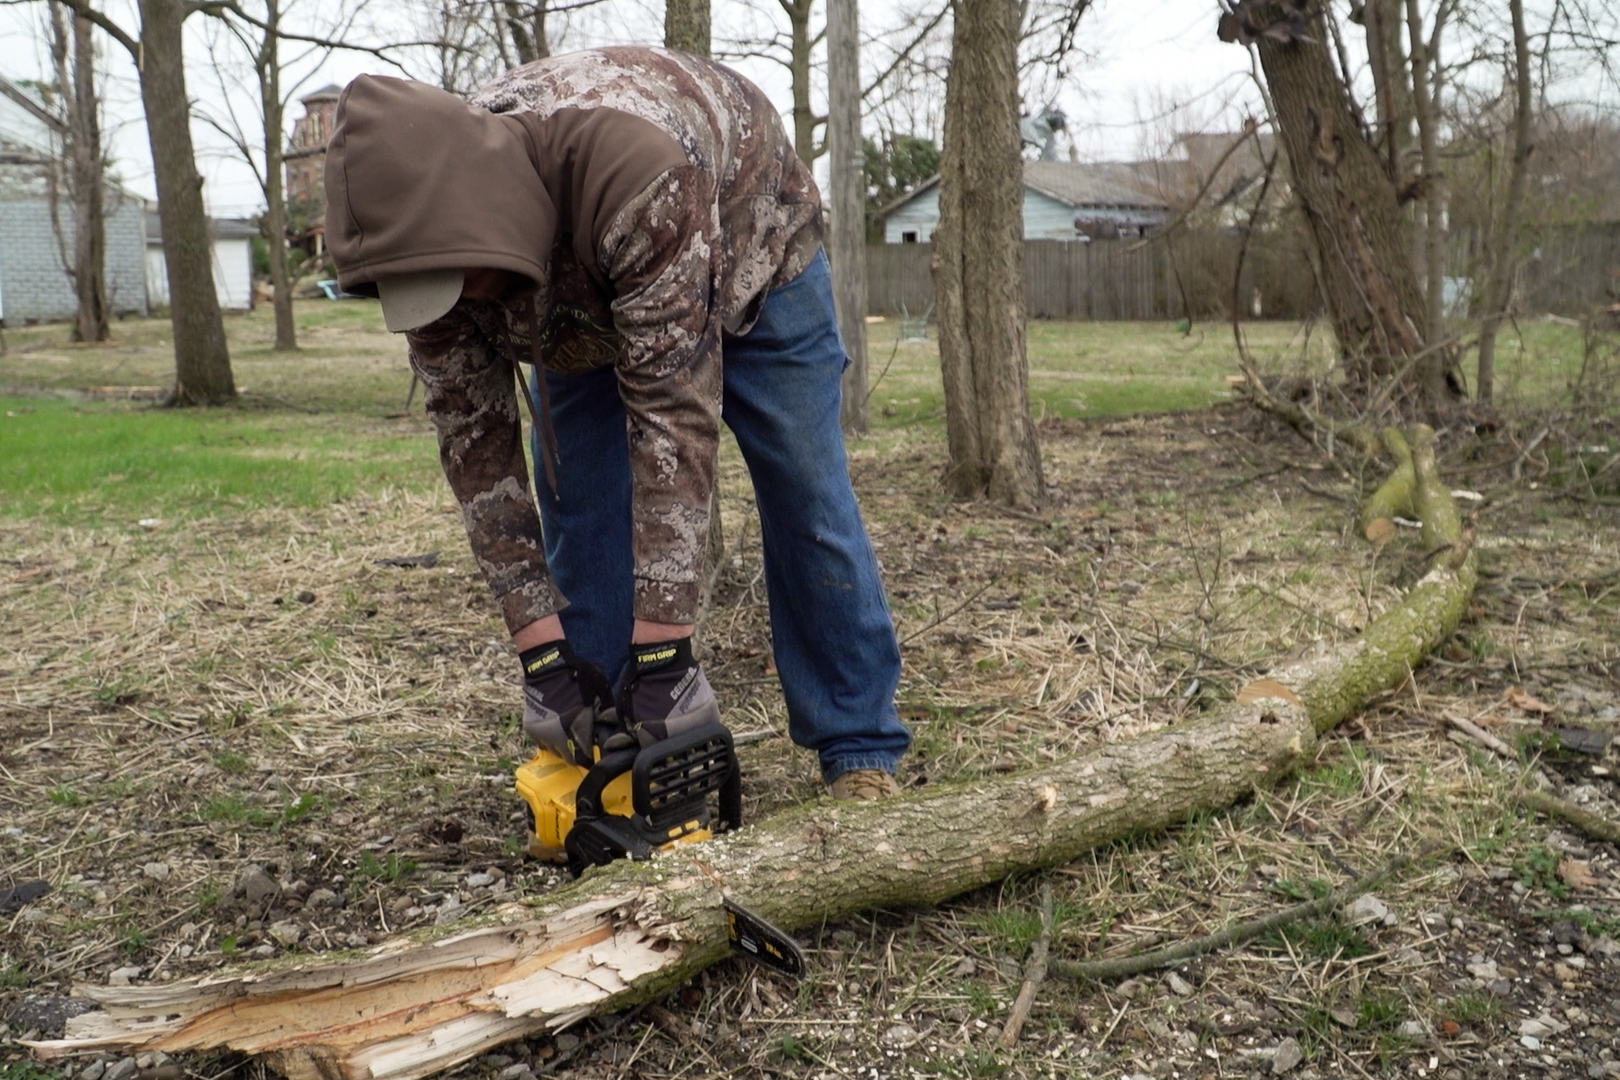 A man uses a chainsaw to break down branches to move away from damaged property.